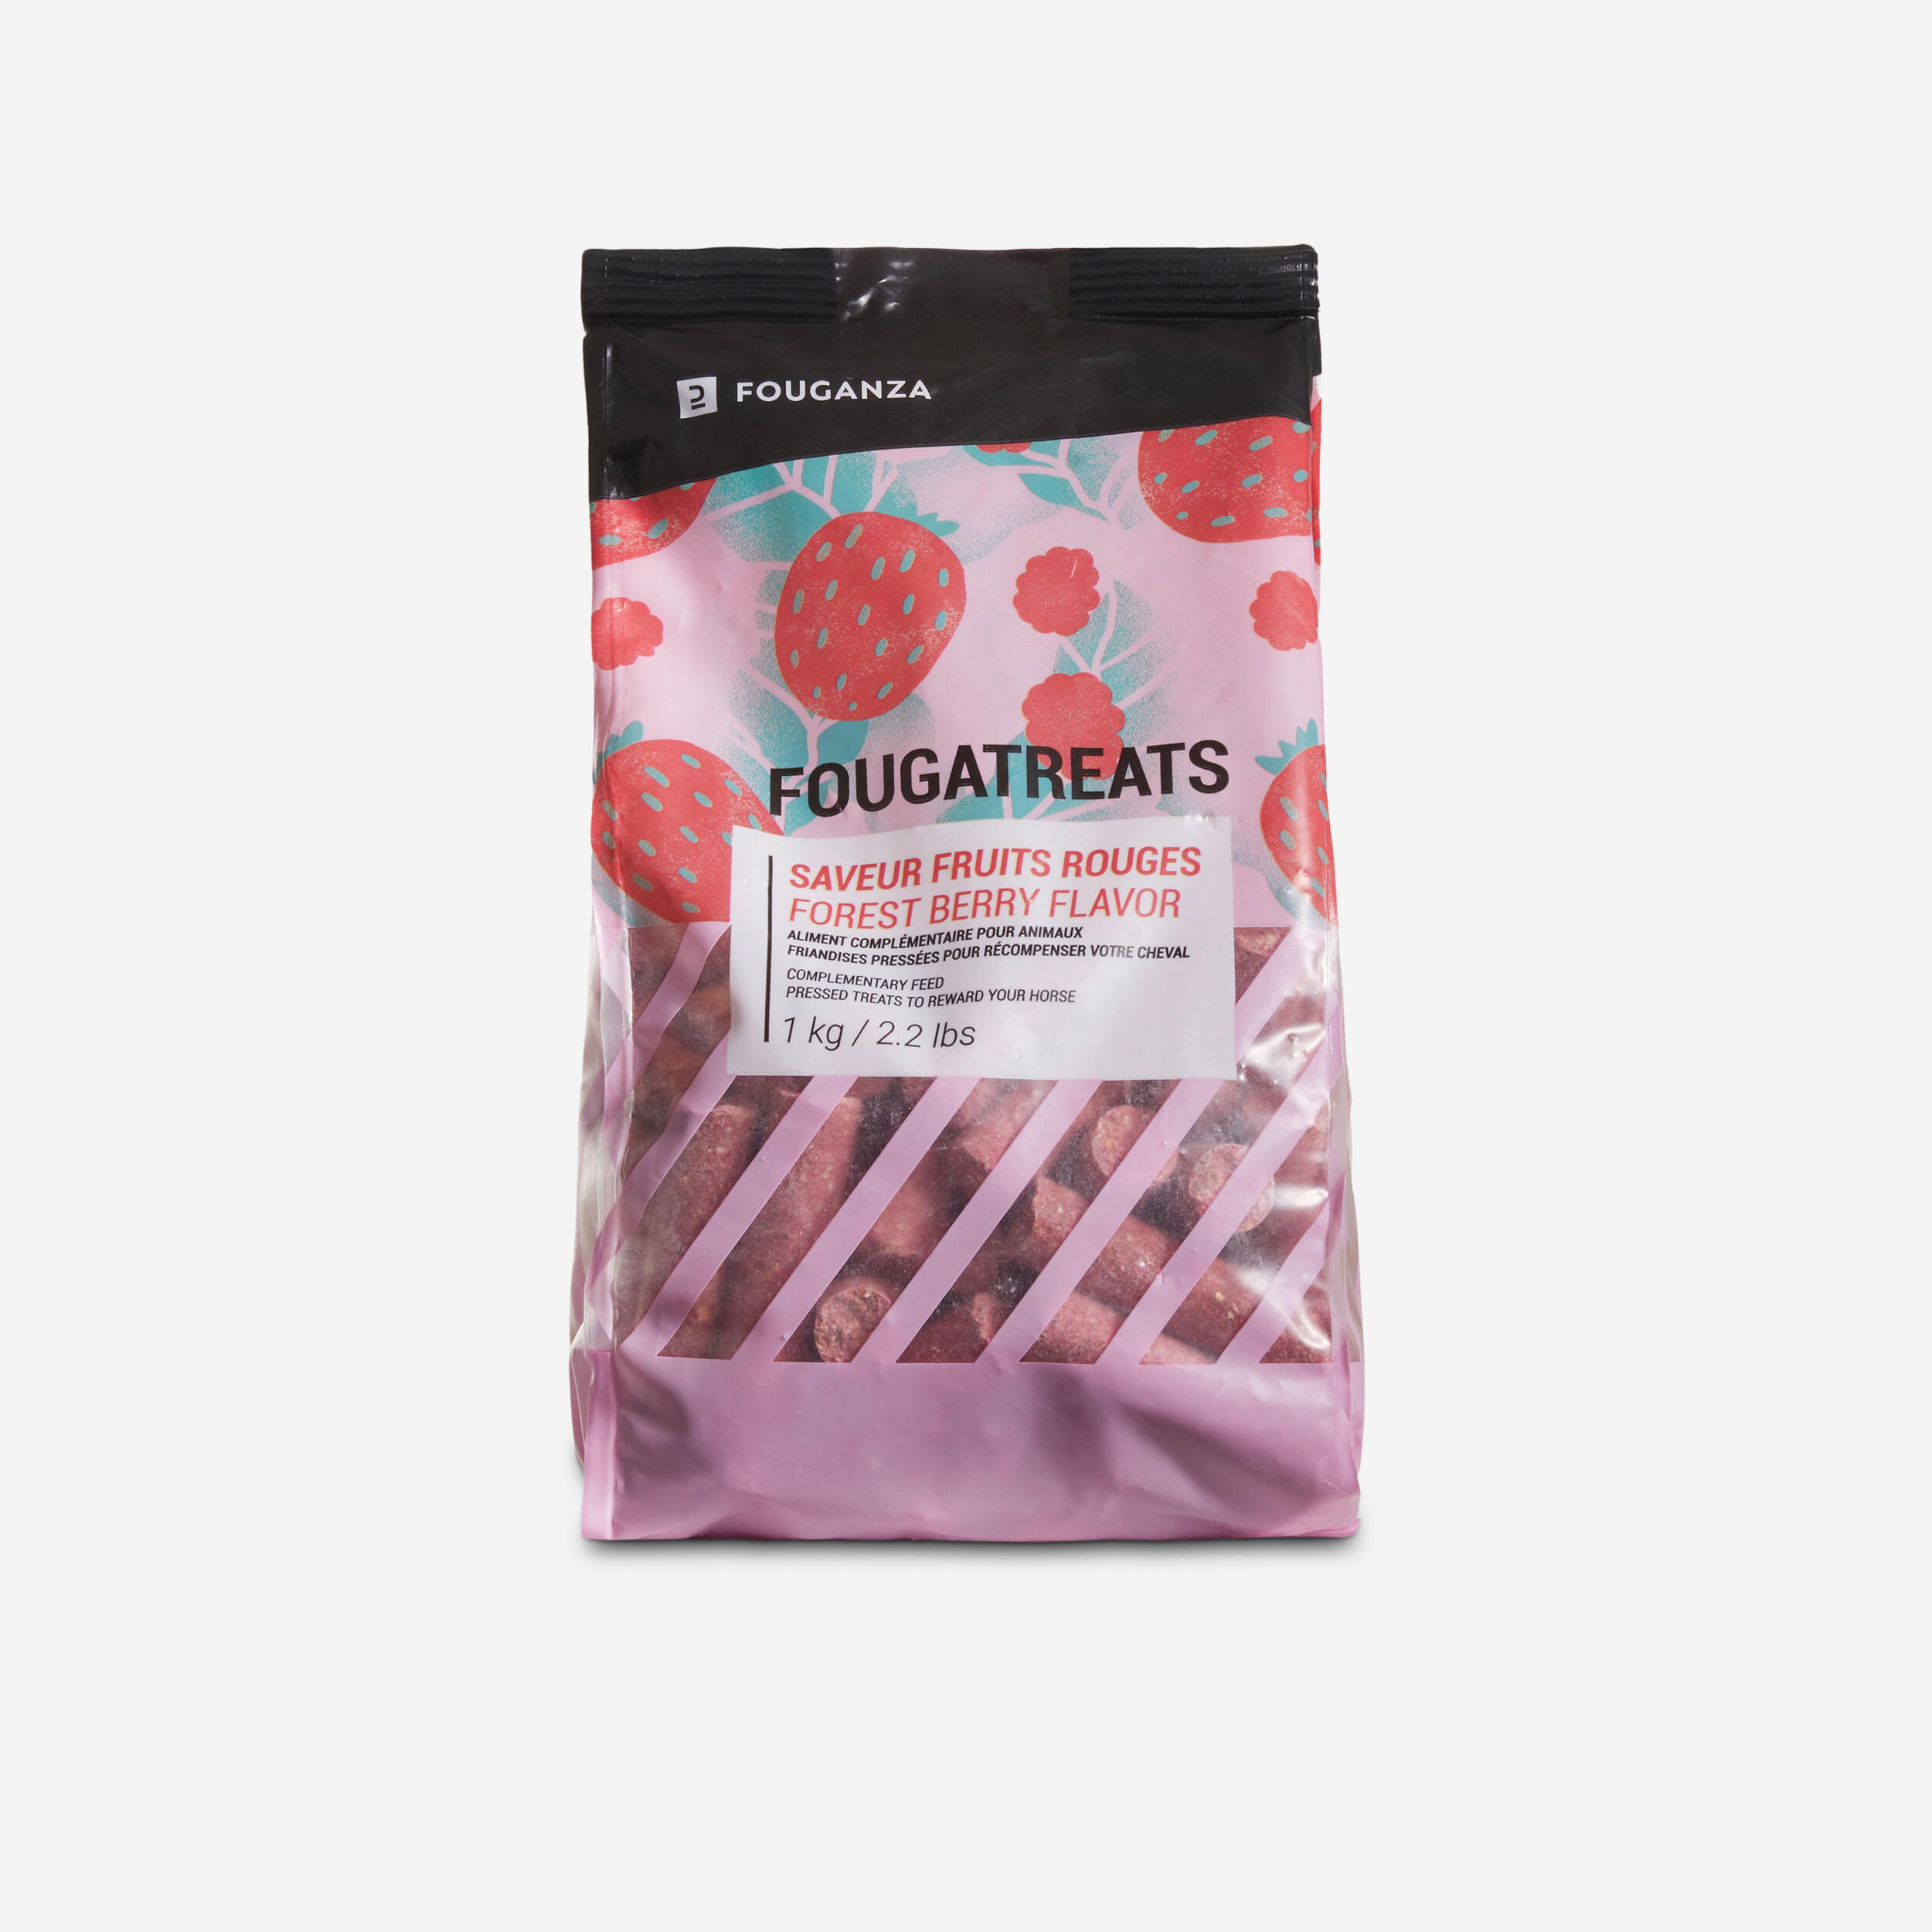 Horse Riding Treats For Horse/Pony Fougatreats 1kg - Red Berries 1/2